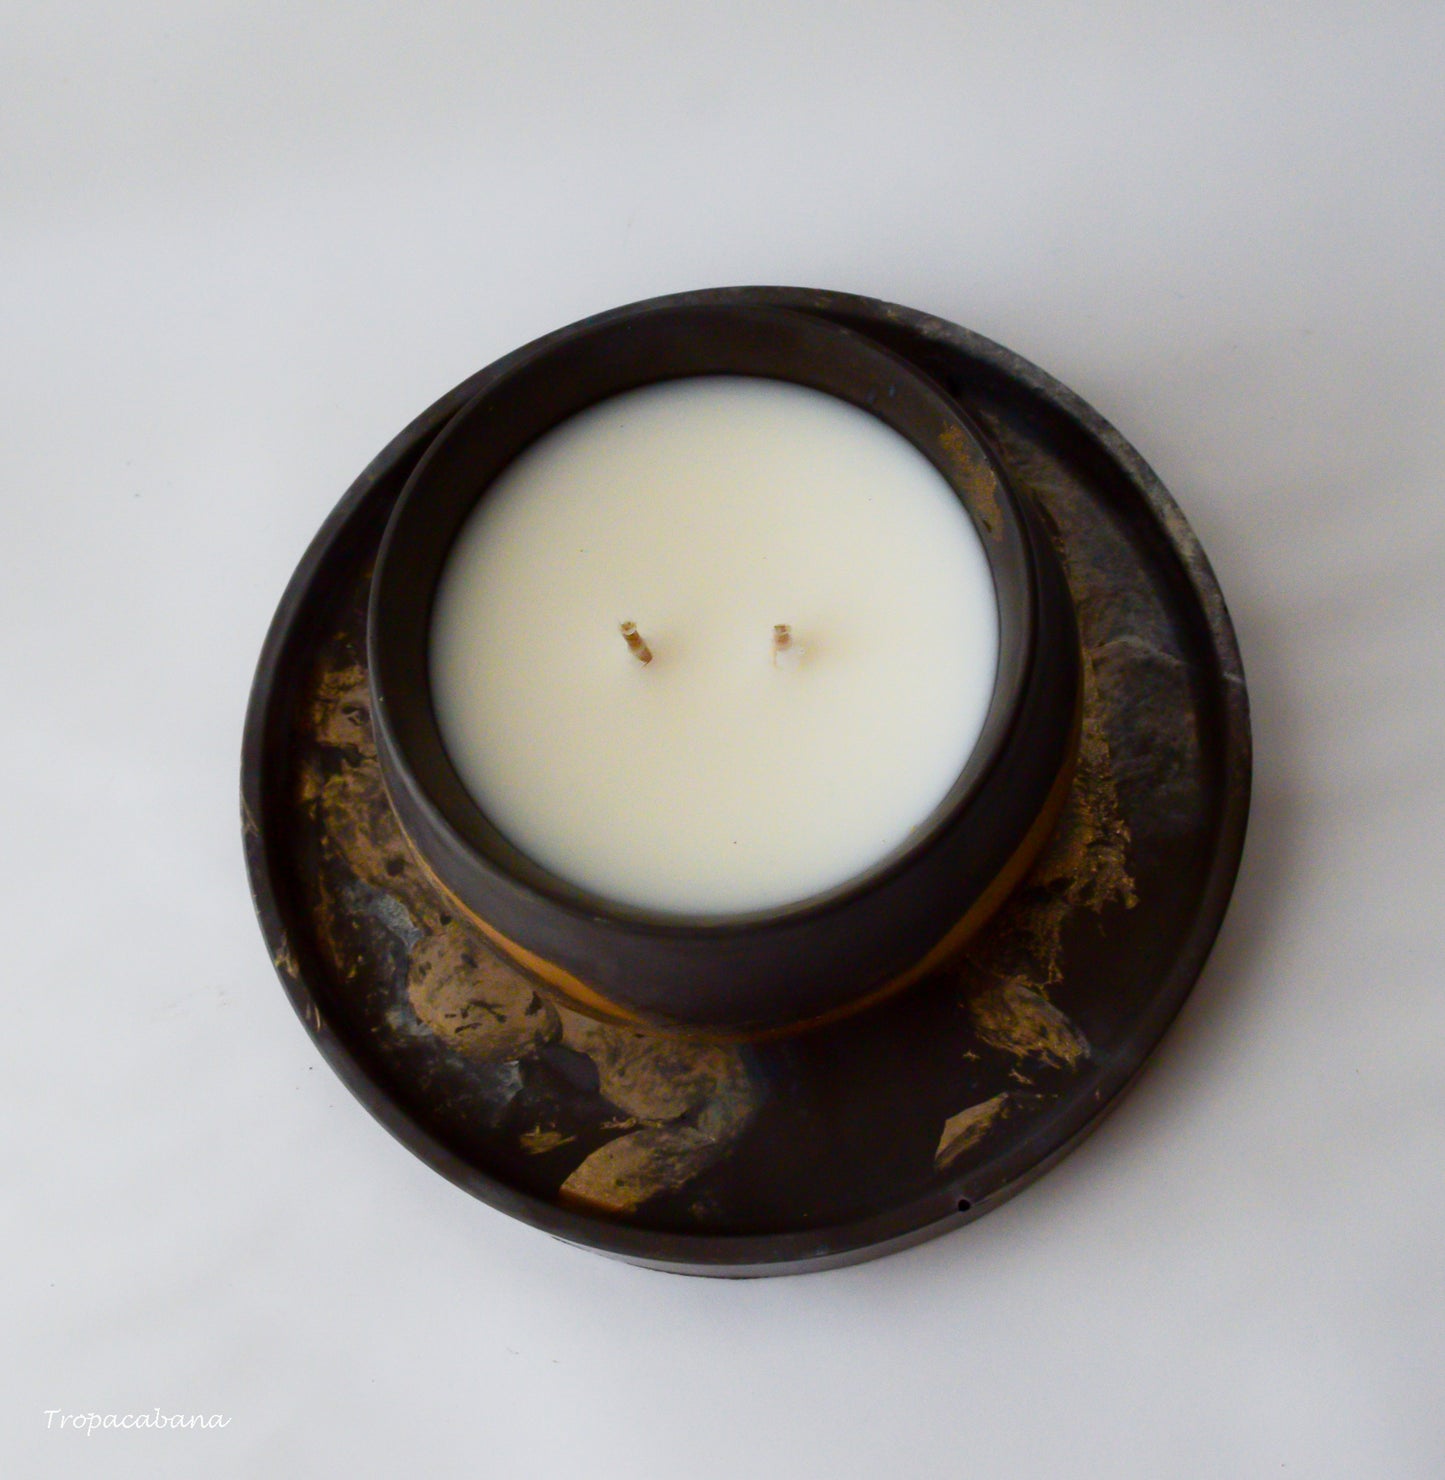 10 oz Handmade Concrete Obsidian Candle, Inspired by the Kilauea Volcano in the big island of Hawaii, in black and golden patterns, smells fruity, floral, beachy and smokey, made with coconut wax, vegan candle, luxury candle, TropaCabana.